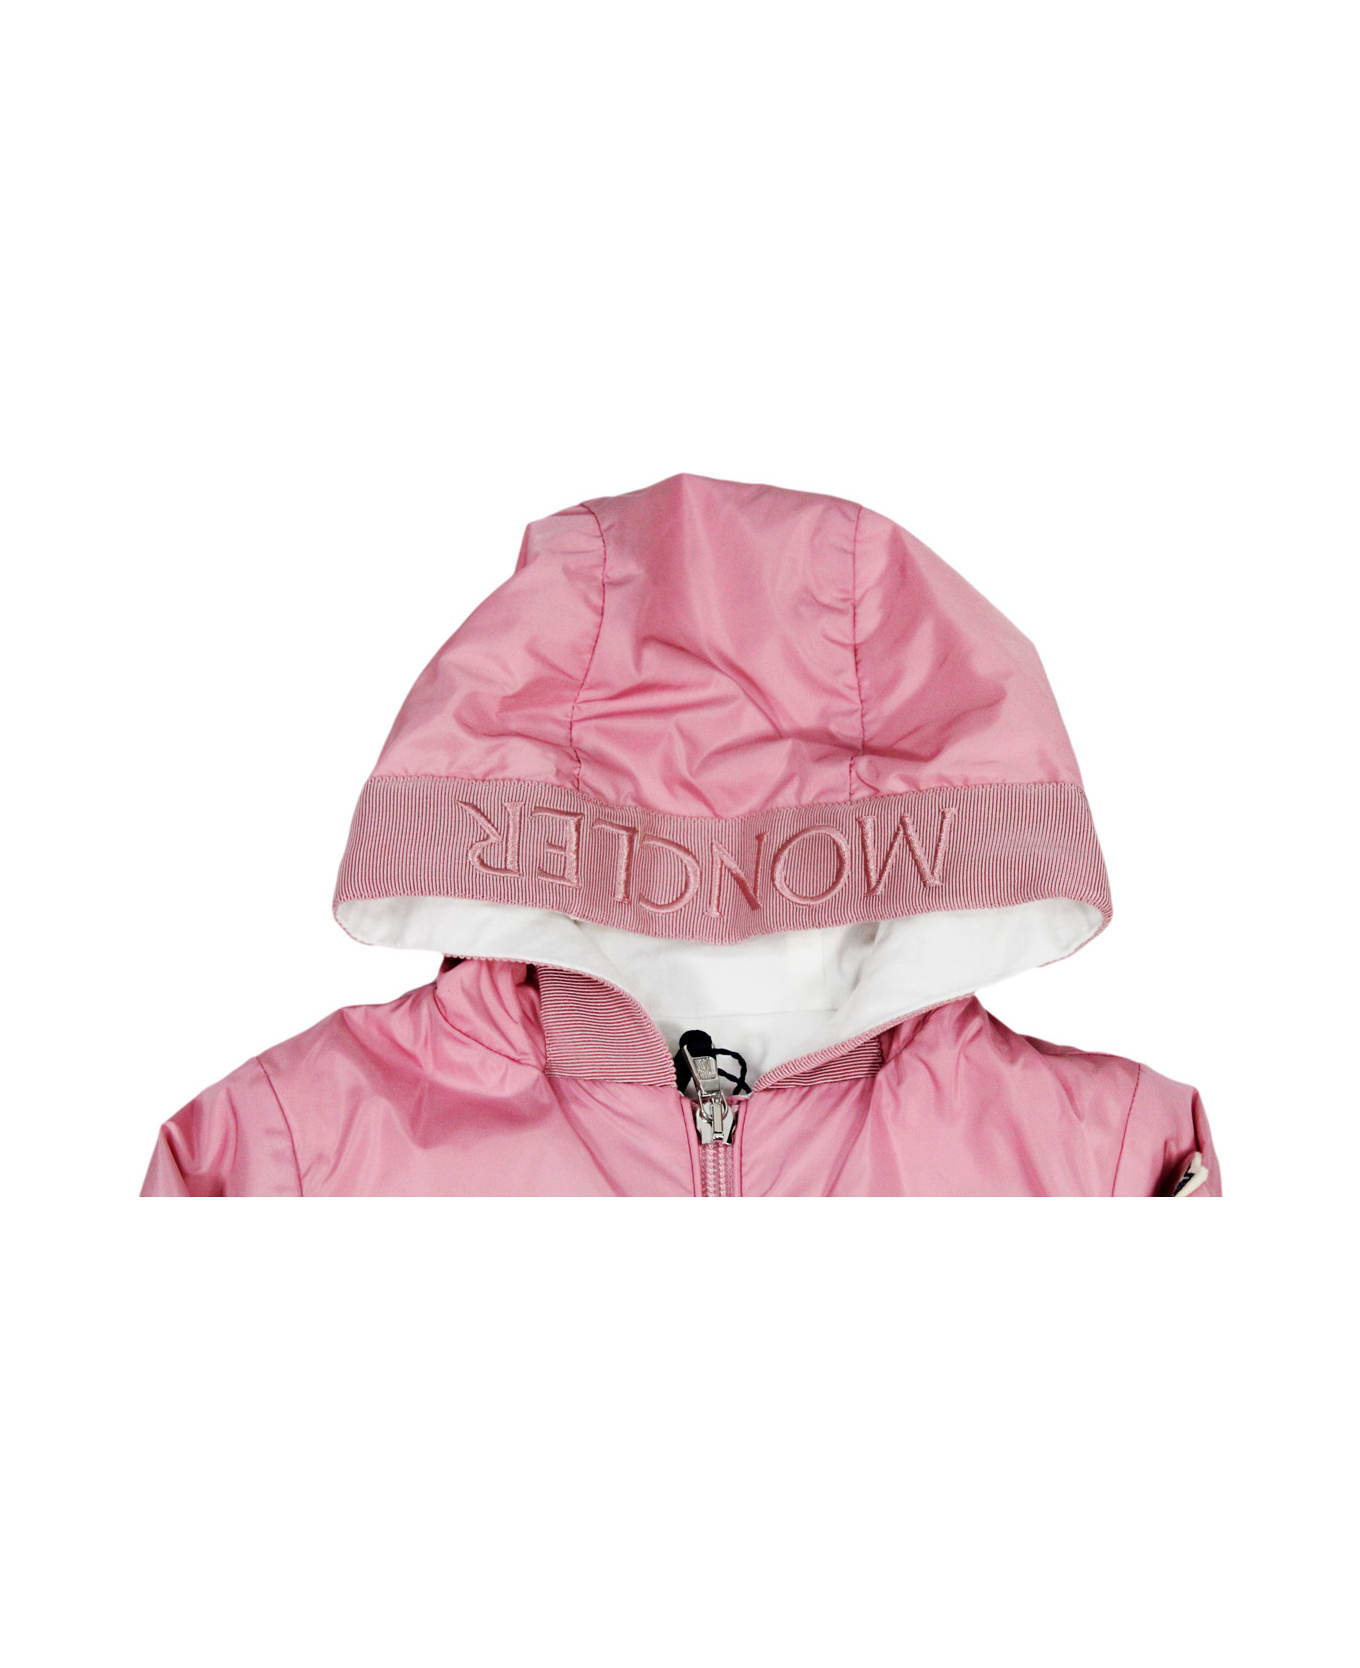 Moncler Light Nylon Messein Jacket With Hood And Zip Closure With Logo Printed On The Arm. - Pink コート＆ジャケット